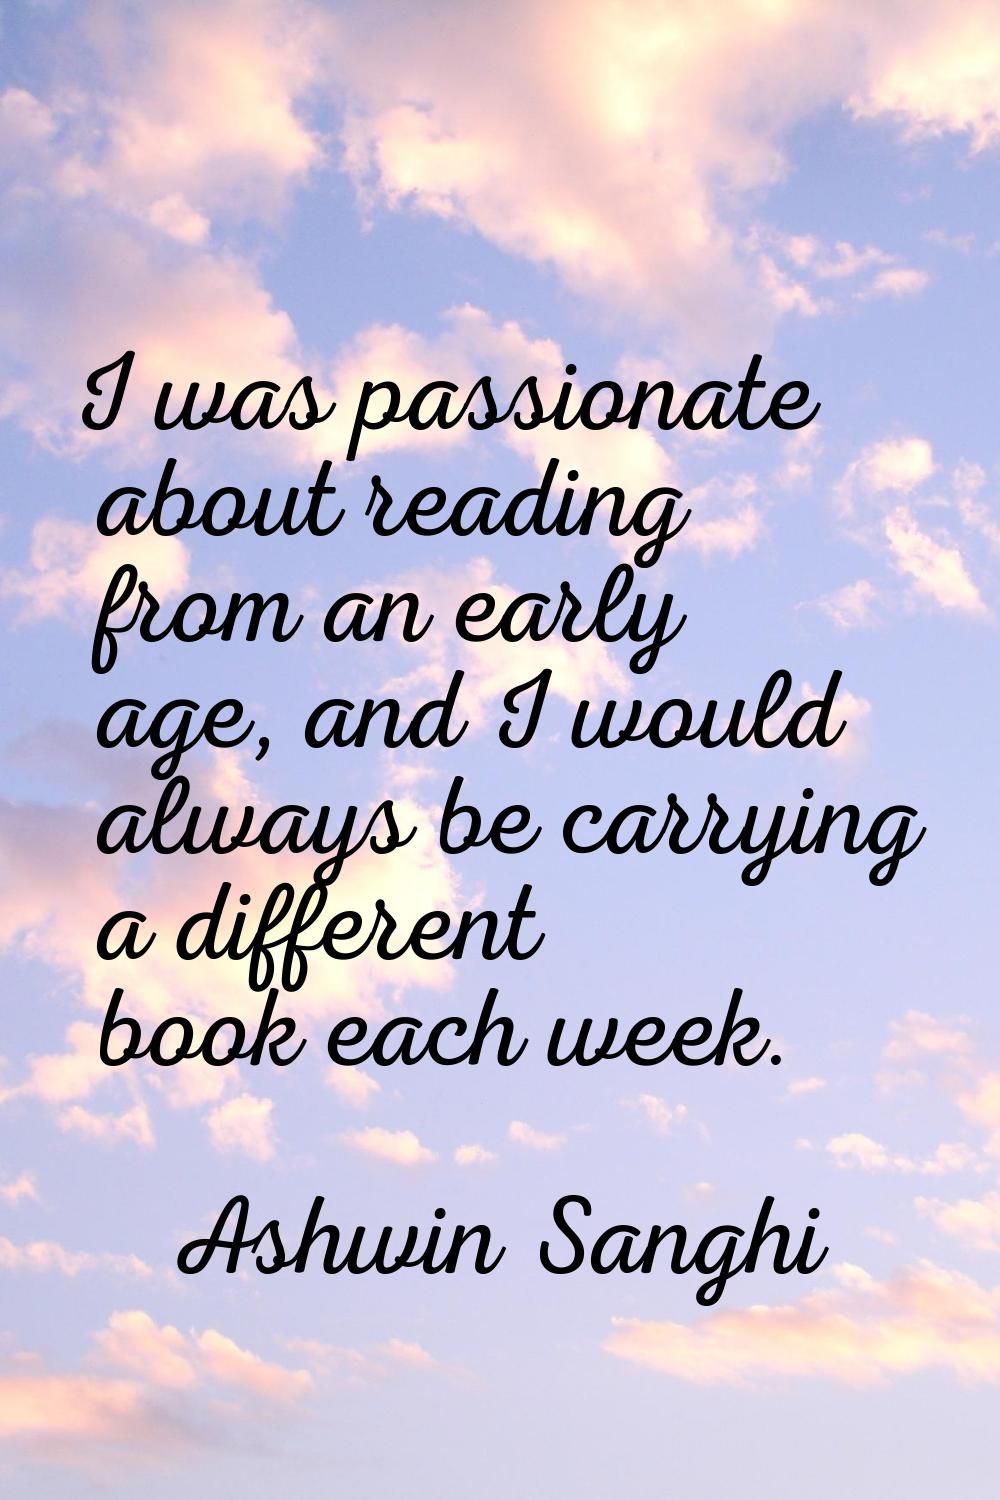 I was passionate about reading from an early age, and I would always be carrying a different book e